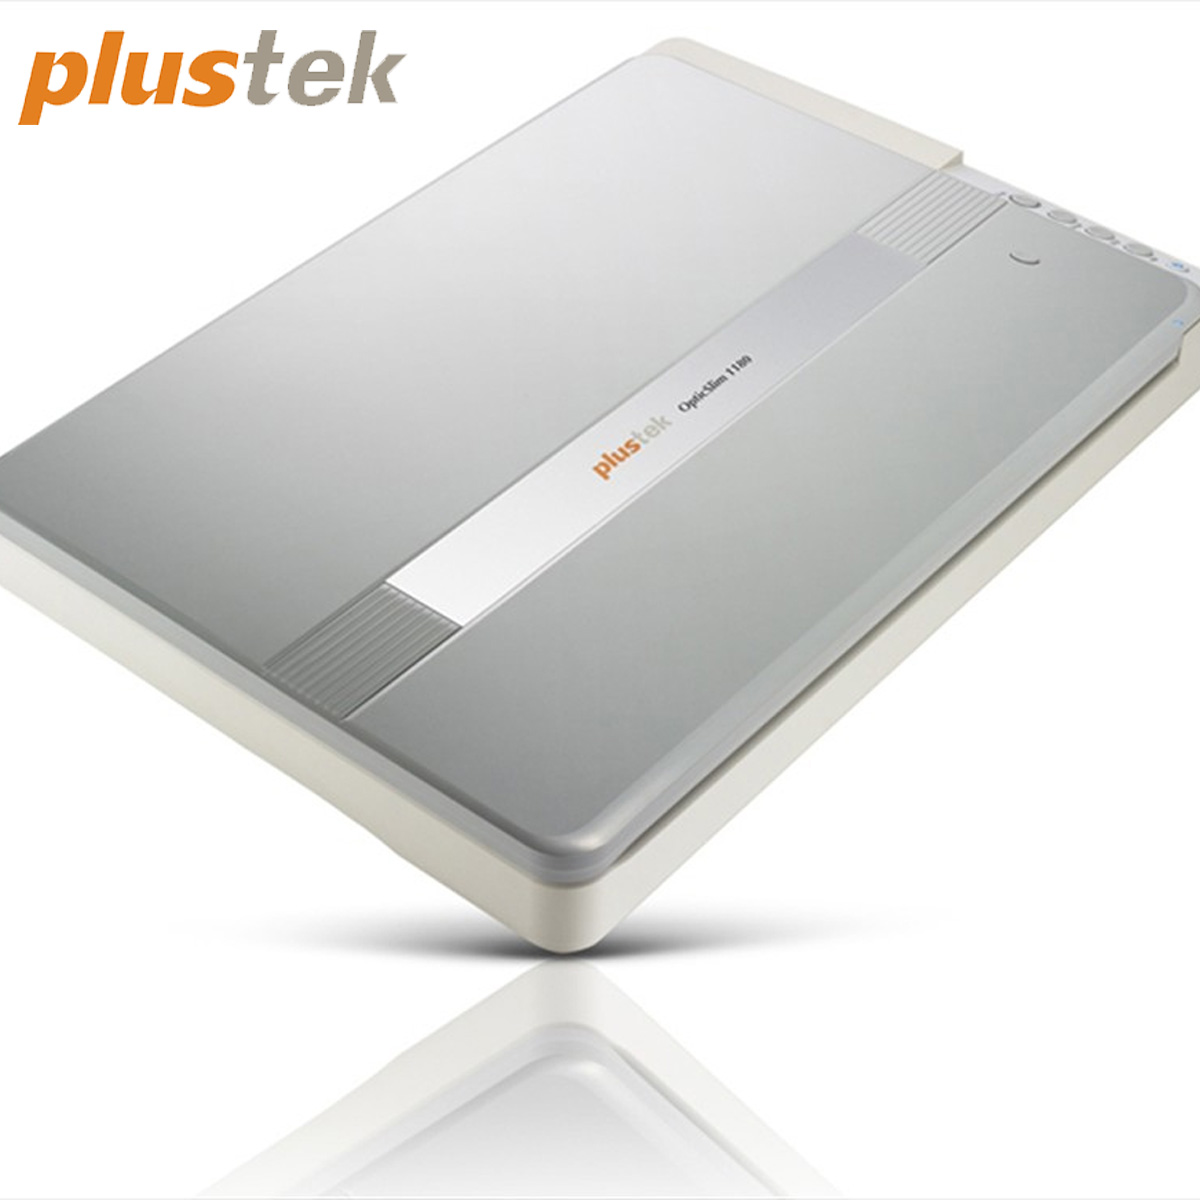 Plustek A3 Large Format Flatbed Scanner OS 1180 : 11.7x17 scan Size for Blueprints and Document. Design for Library, School and Soho. A3 scan for 8 sec, Support Mac and PC